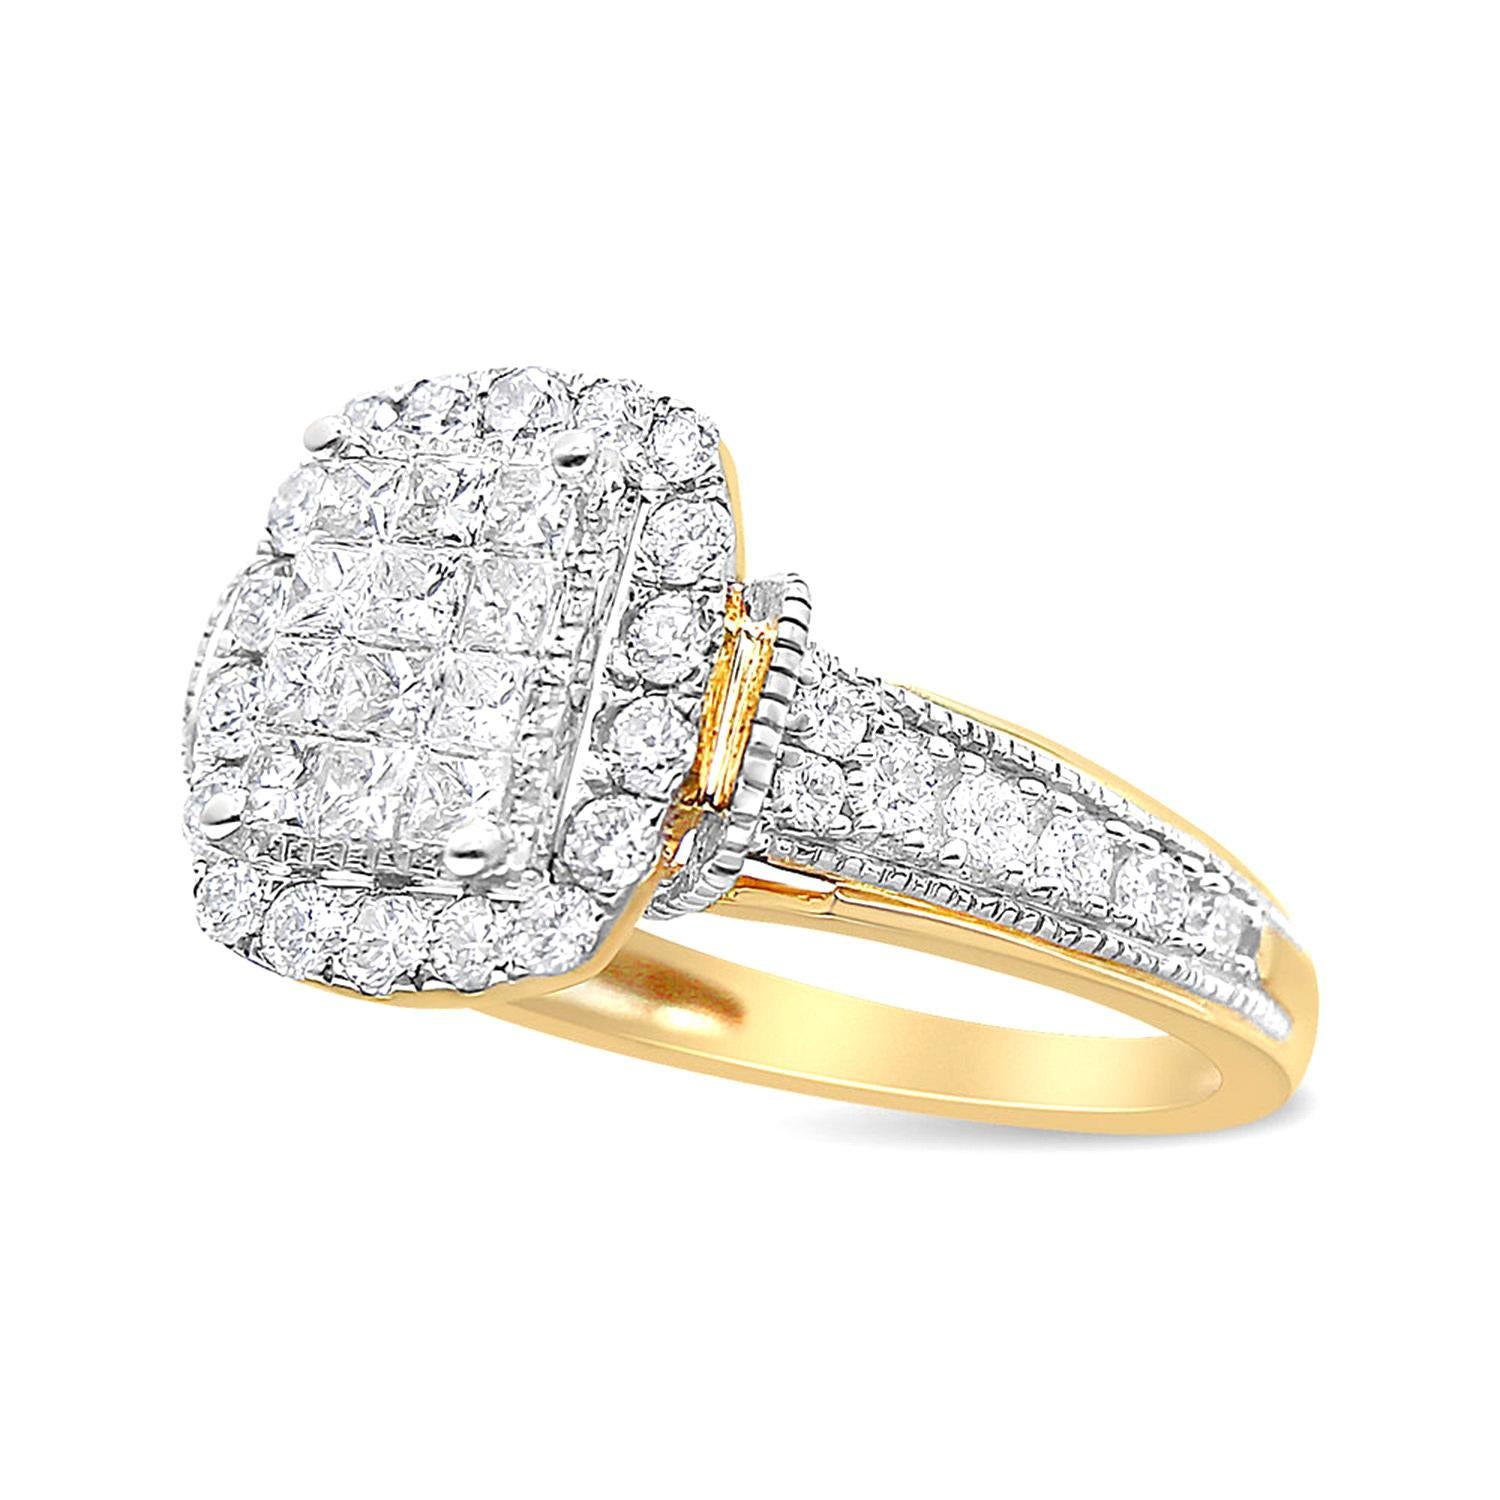 Illusion Set Diamond Ring 1.06 Carats 14K Yellow Gold In Excellent Condition For Sale In Laguna Niguel, CA